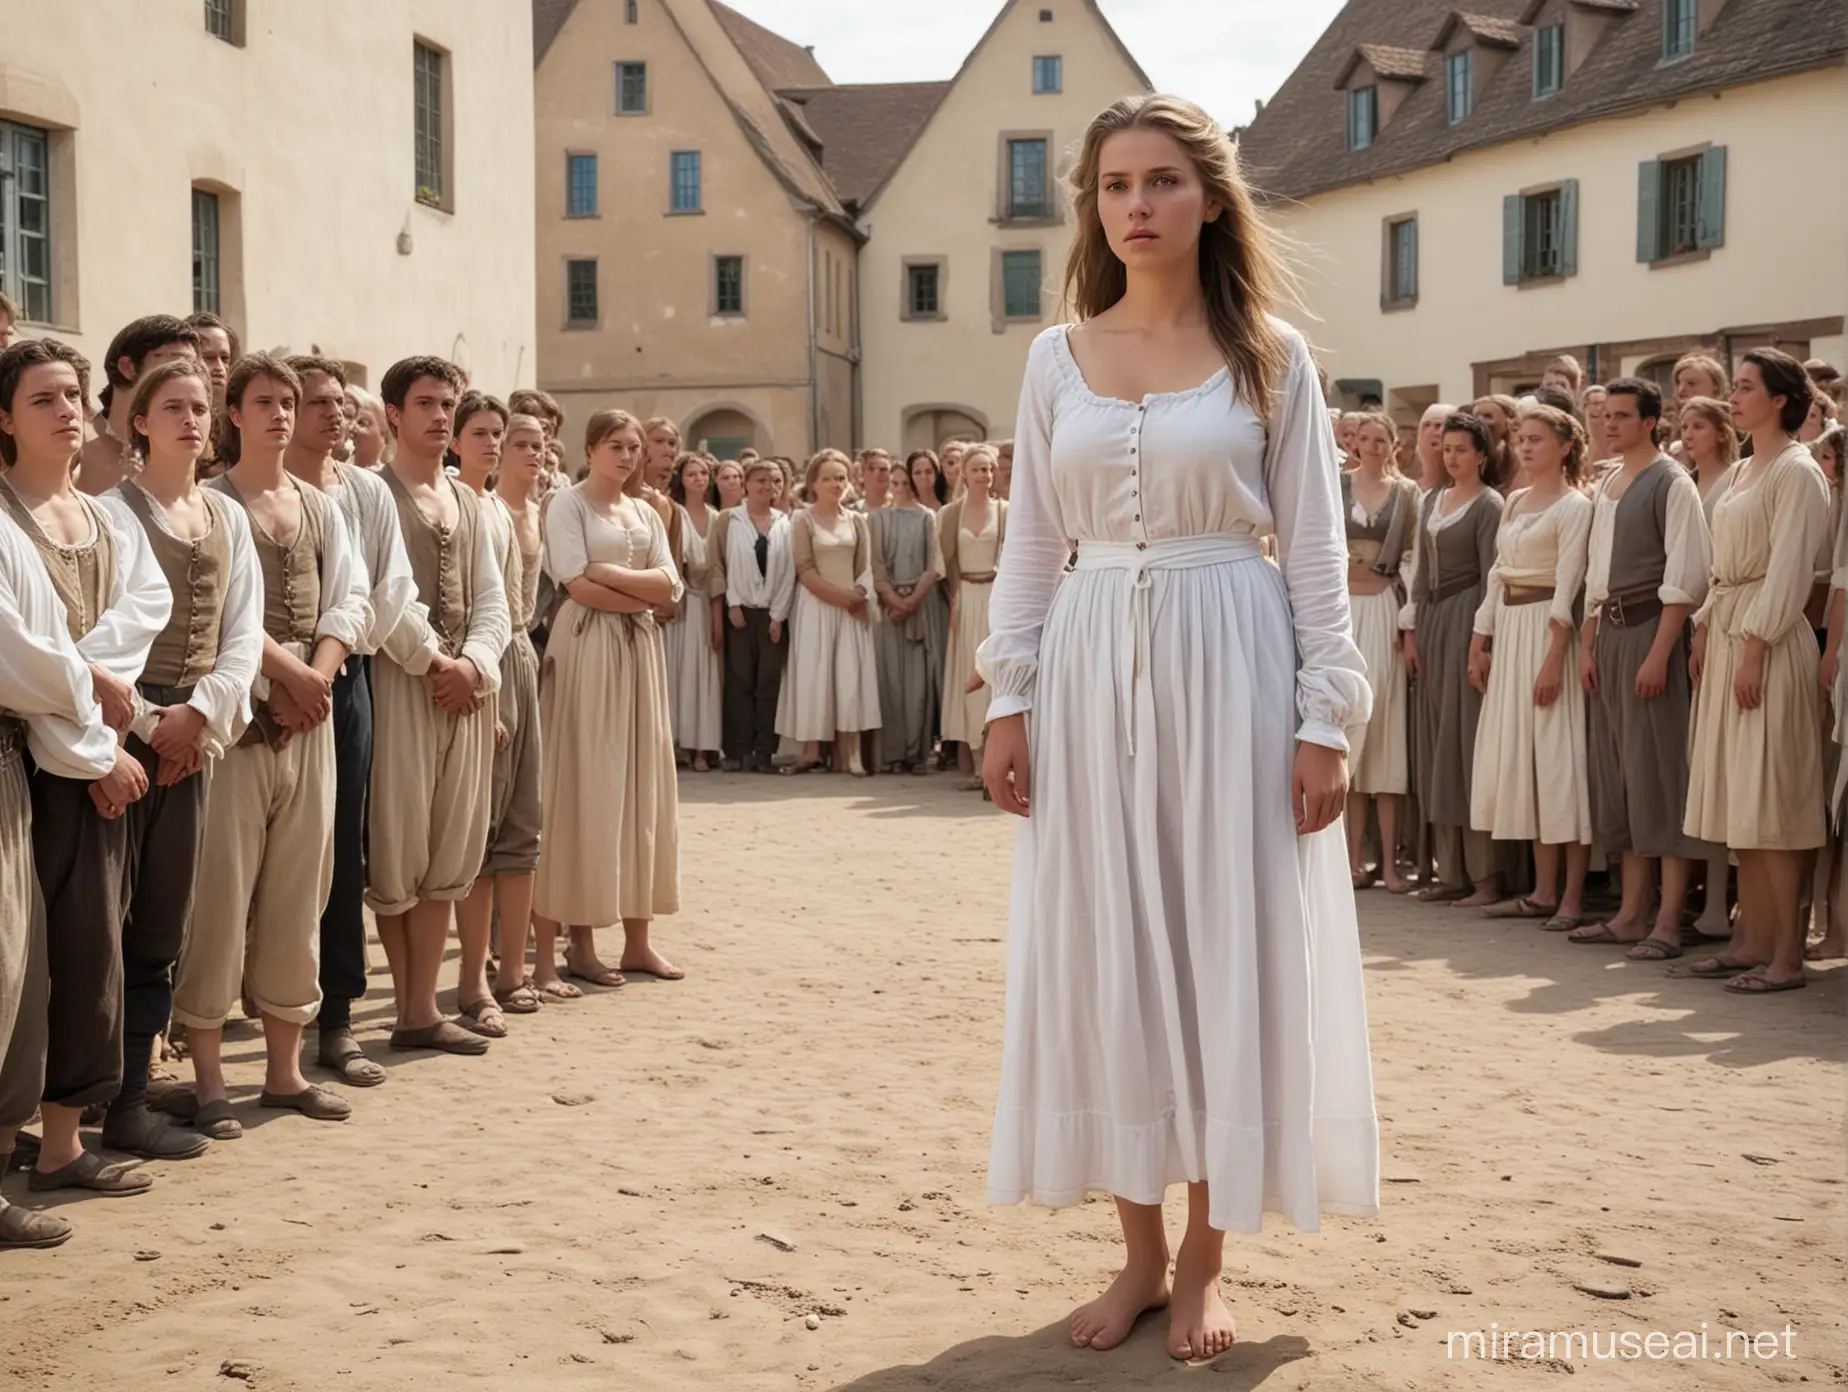 A busty female prisoner(german, 20 years old, barefoot) stands in a village square(1700s) in white gowndress(medium tied back hair), She is shamed and desperate, background: a crowd stand directly behind the prisoner